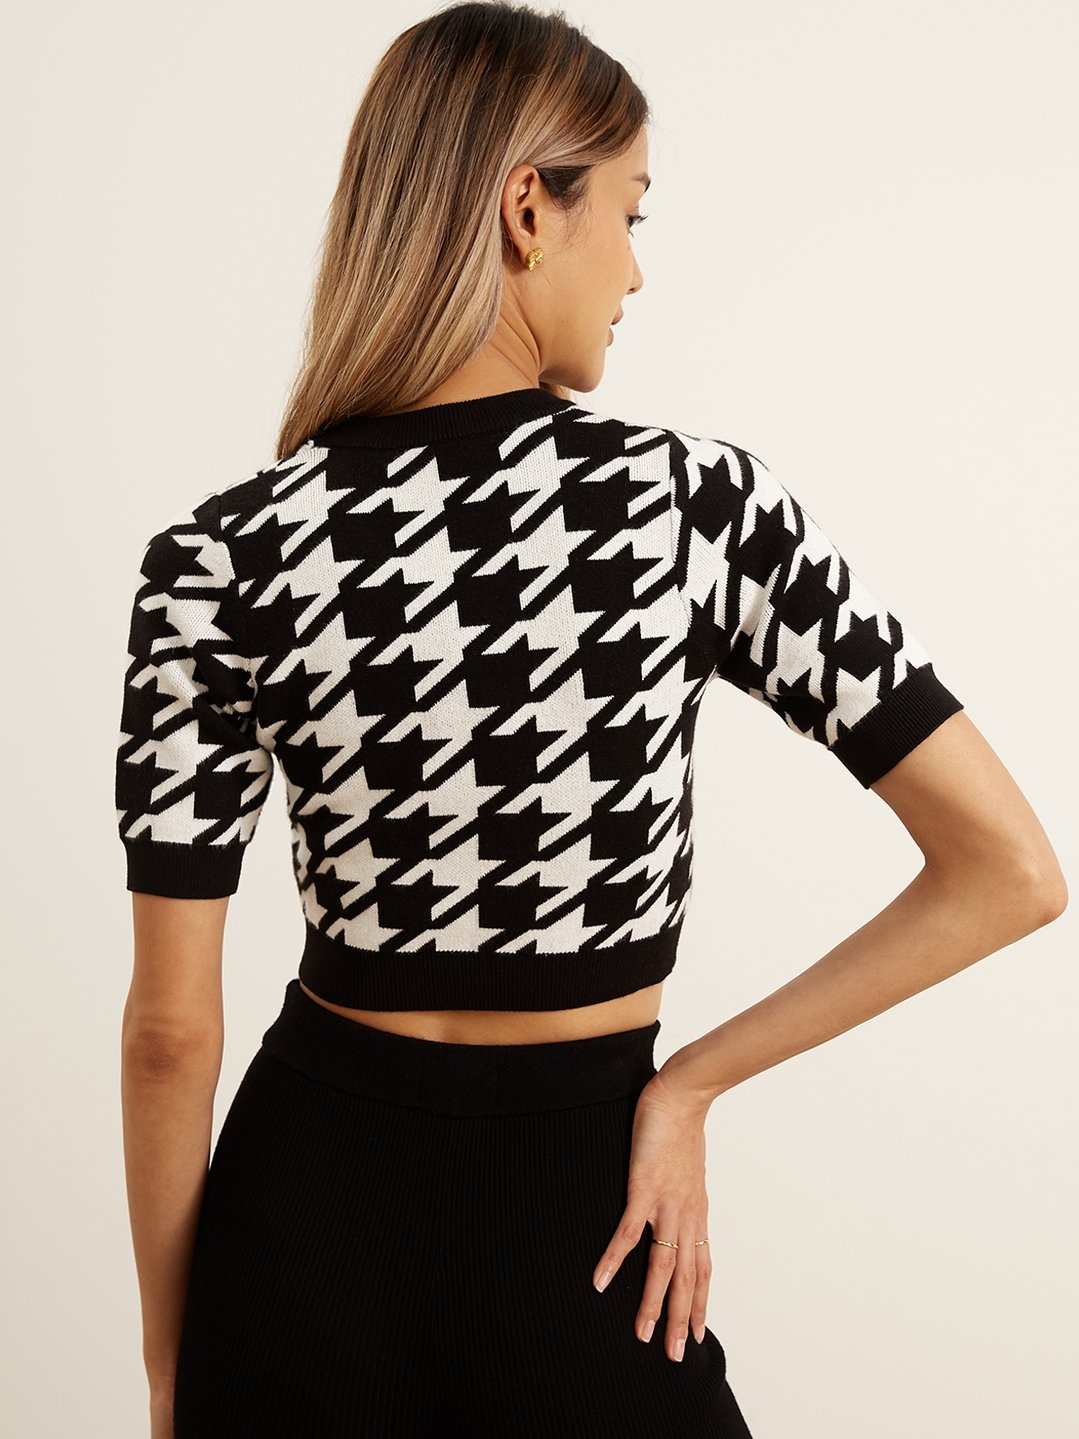 Houndstooth Print Short Sleeve Crop Top - Black/White - Pomelo Fashion